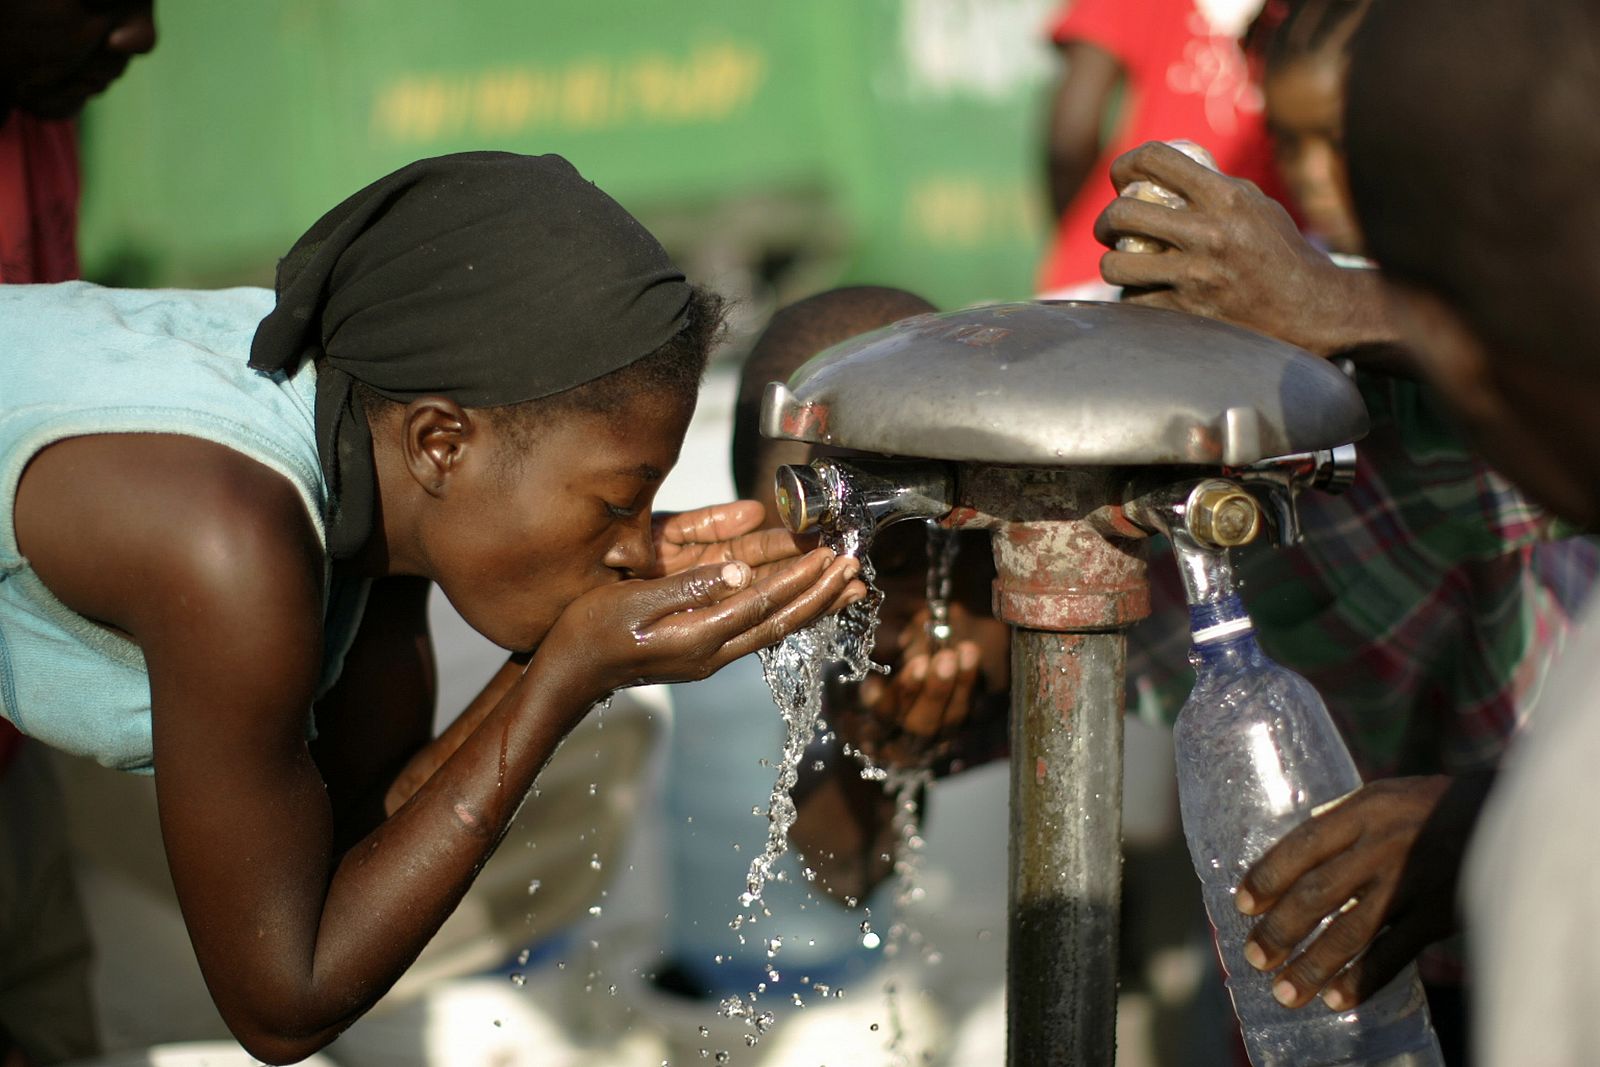 A Haitian woman drinks water from a communal water pipe in Port-au-Prince